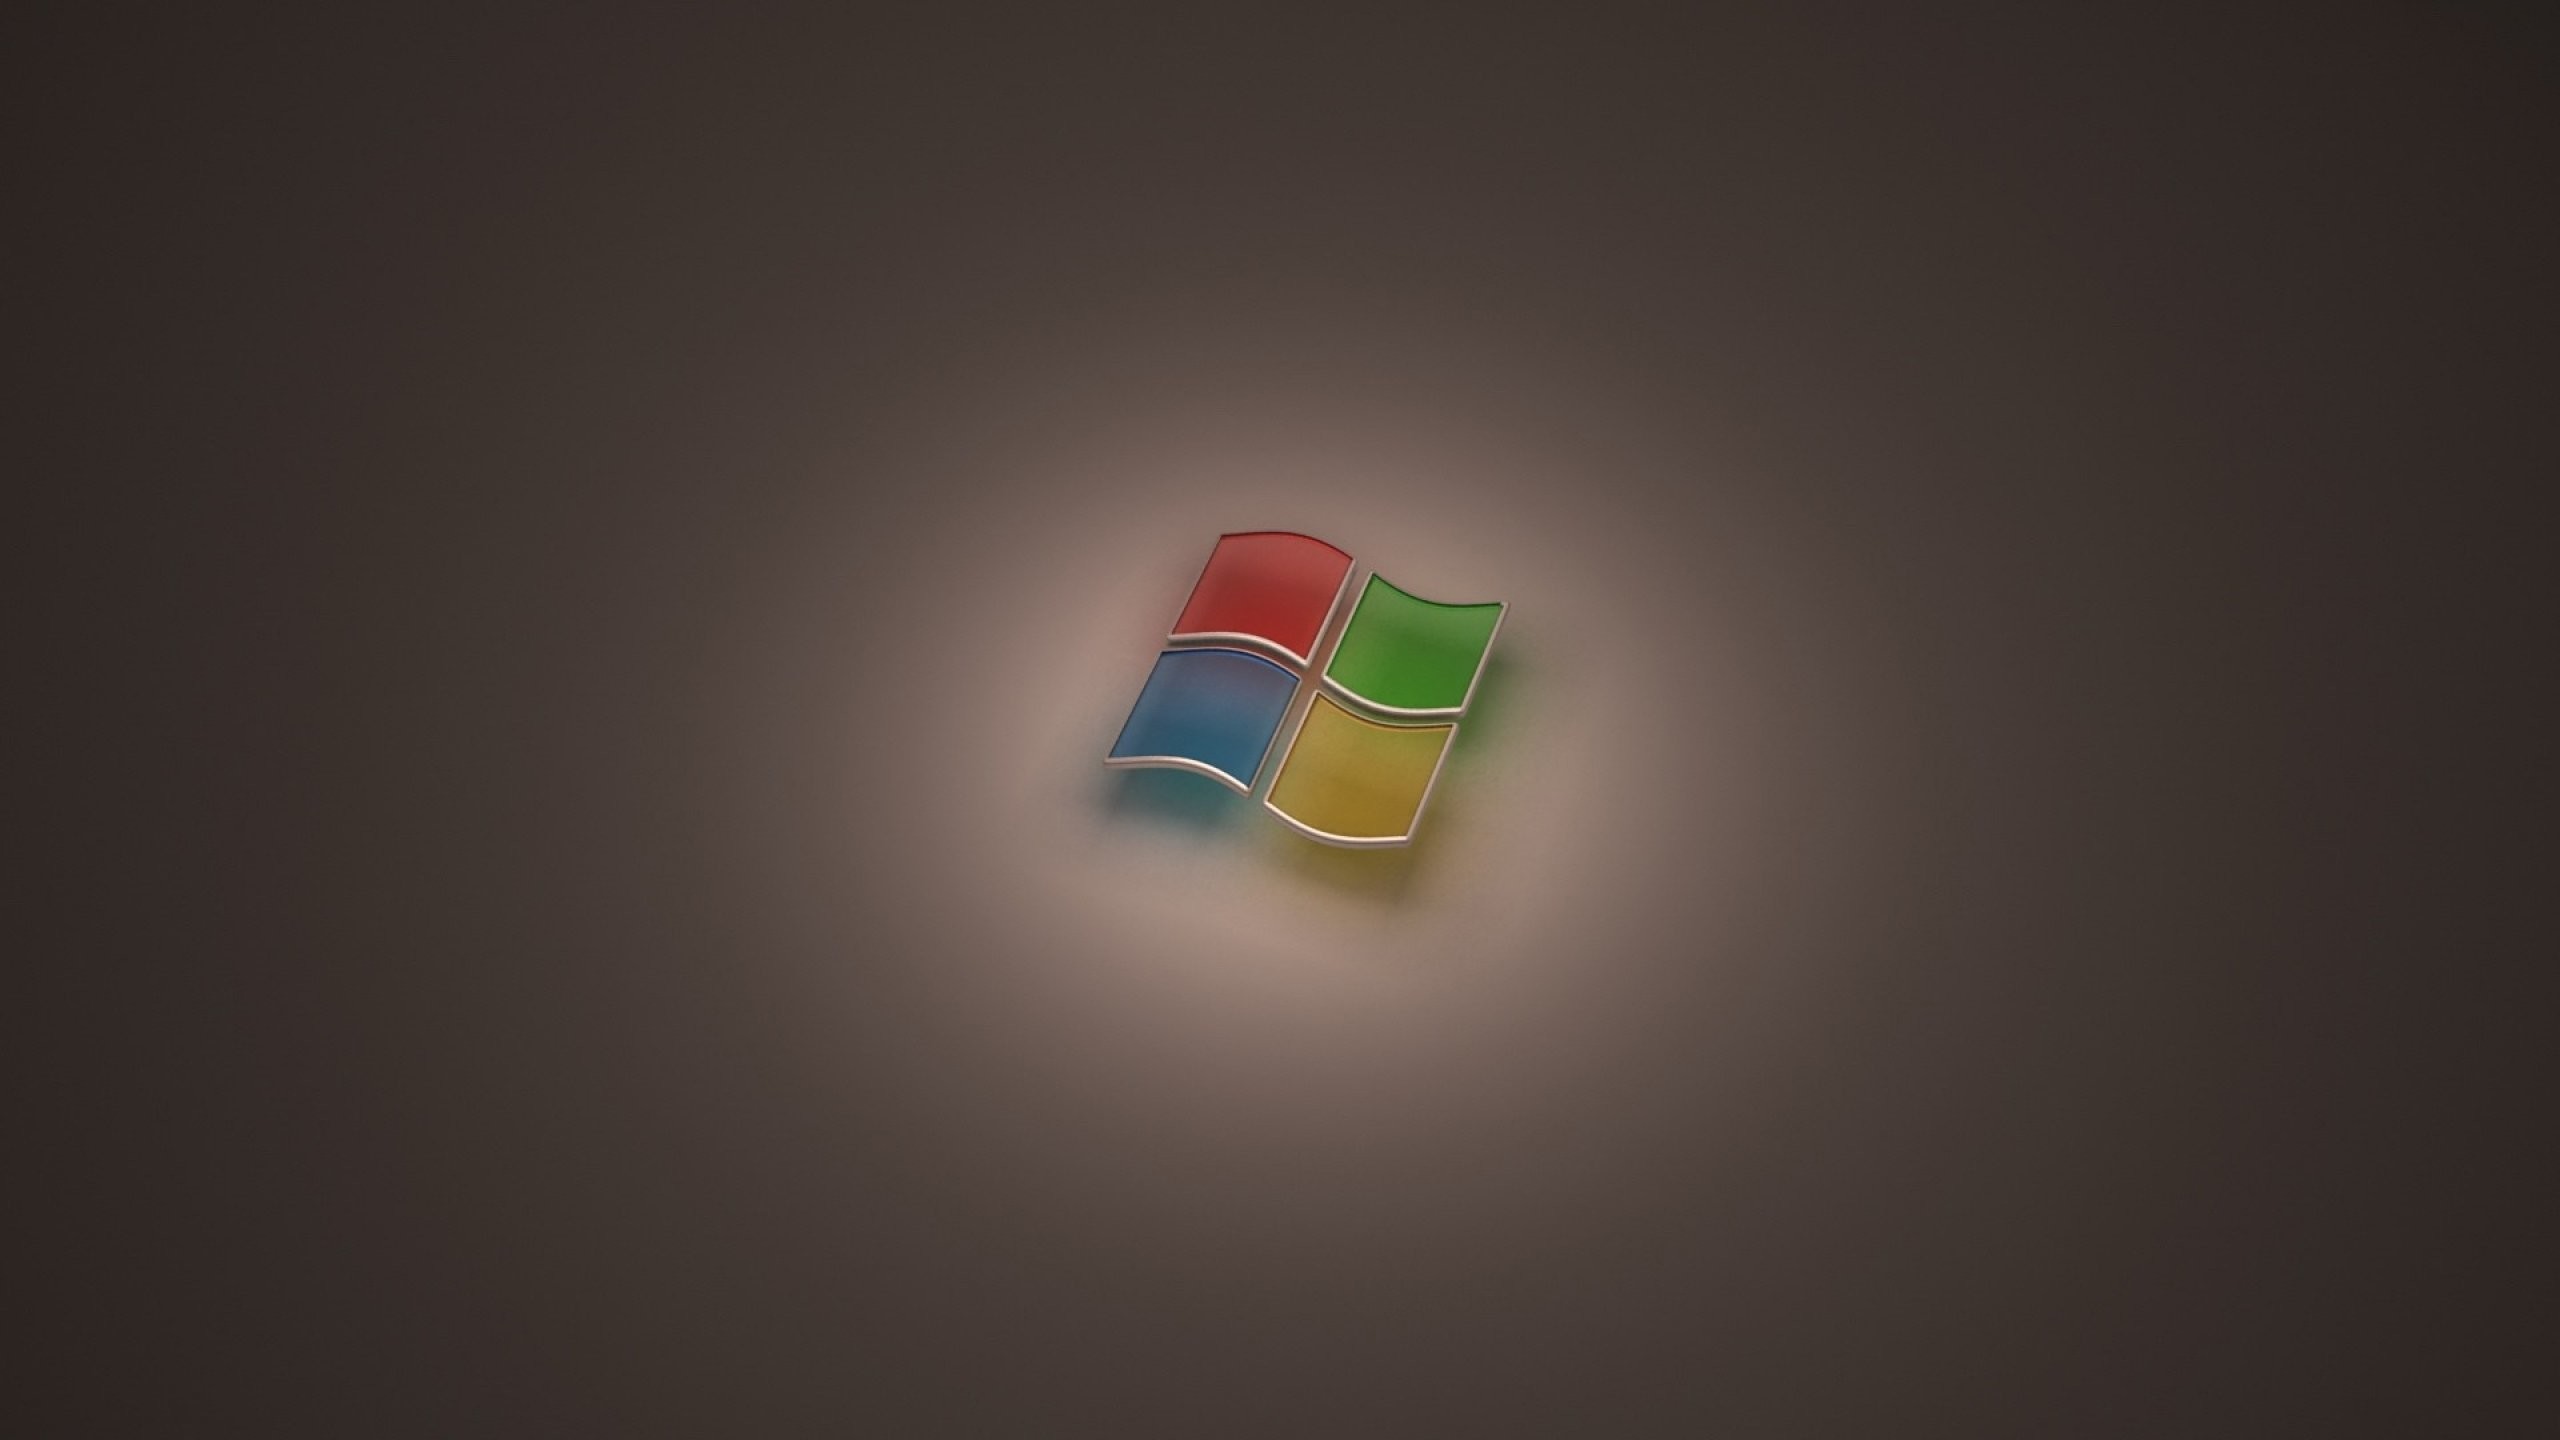 2560x1440 Microsoft Wallpapers HD, Desktop Backgrounds, Images and Pictures